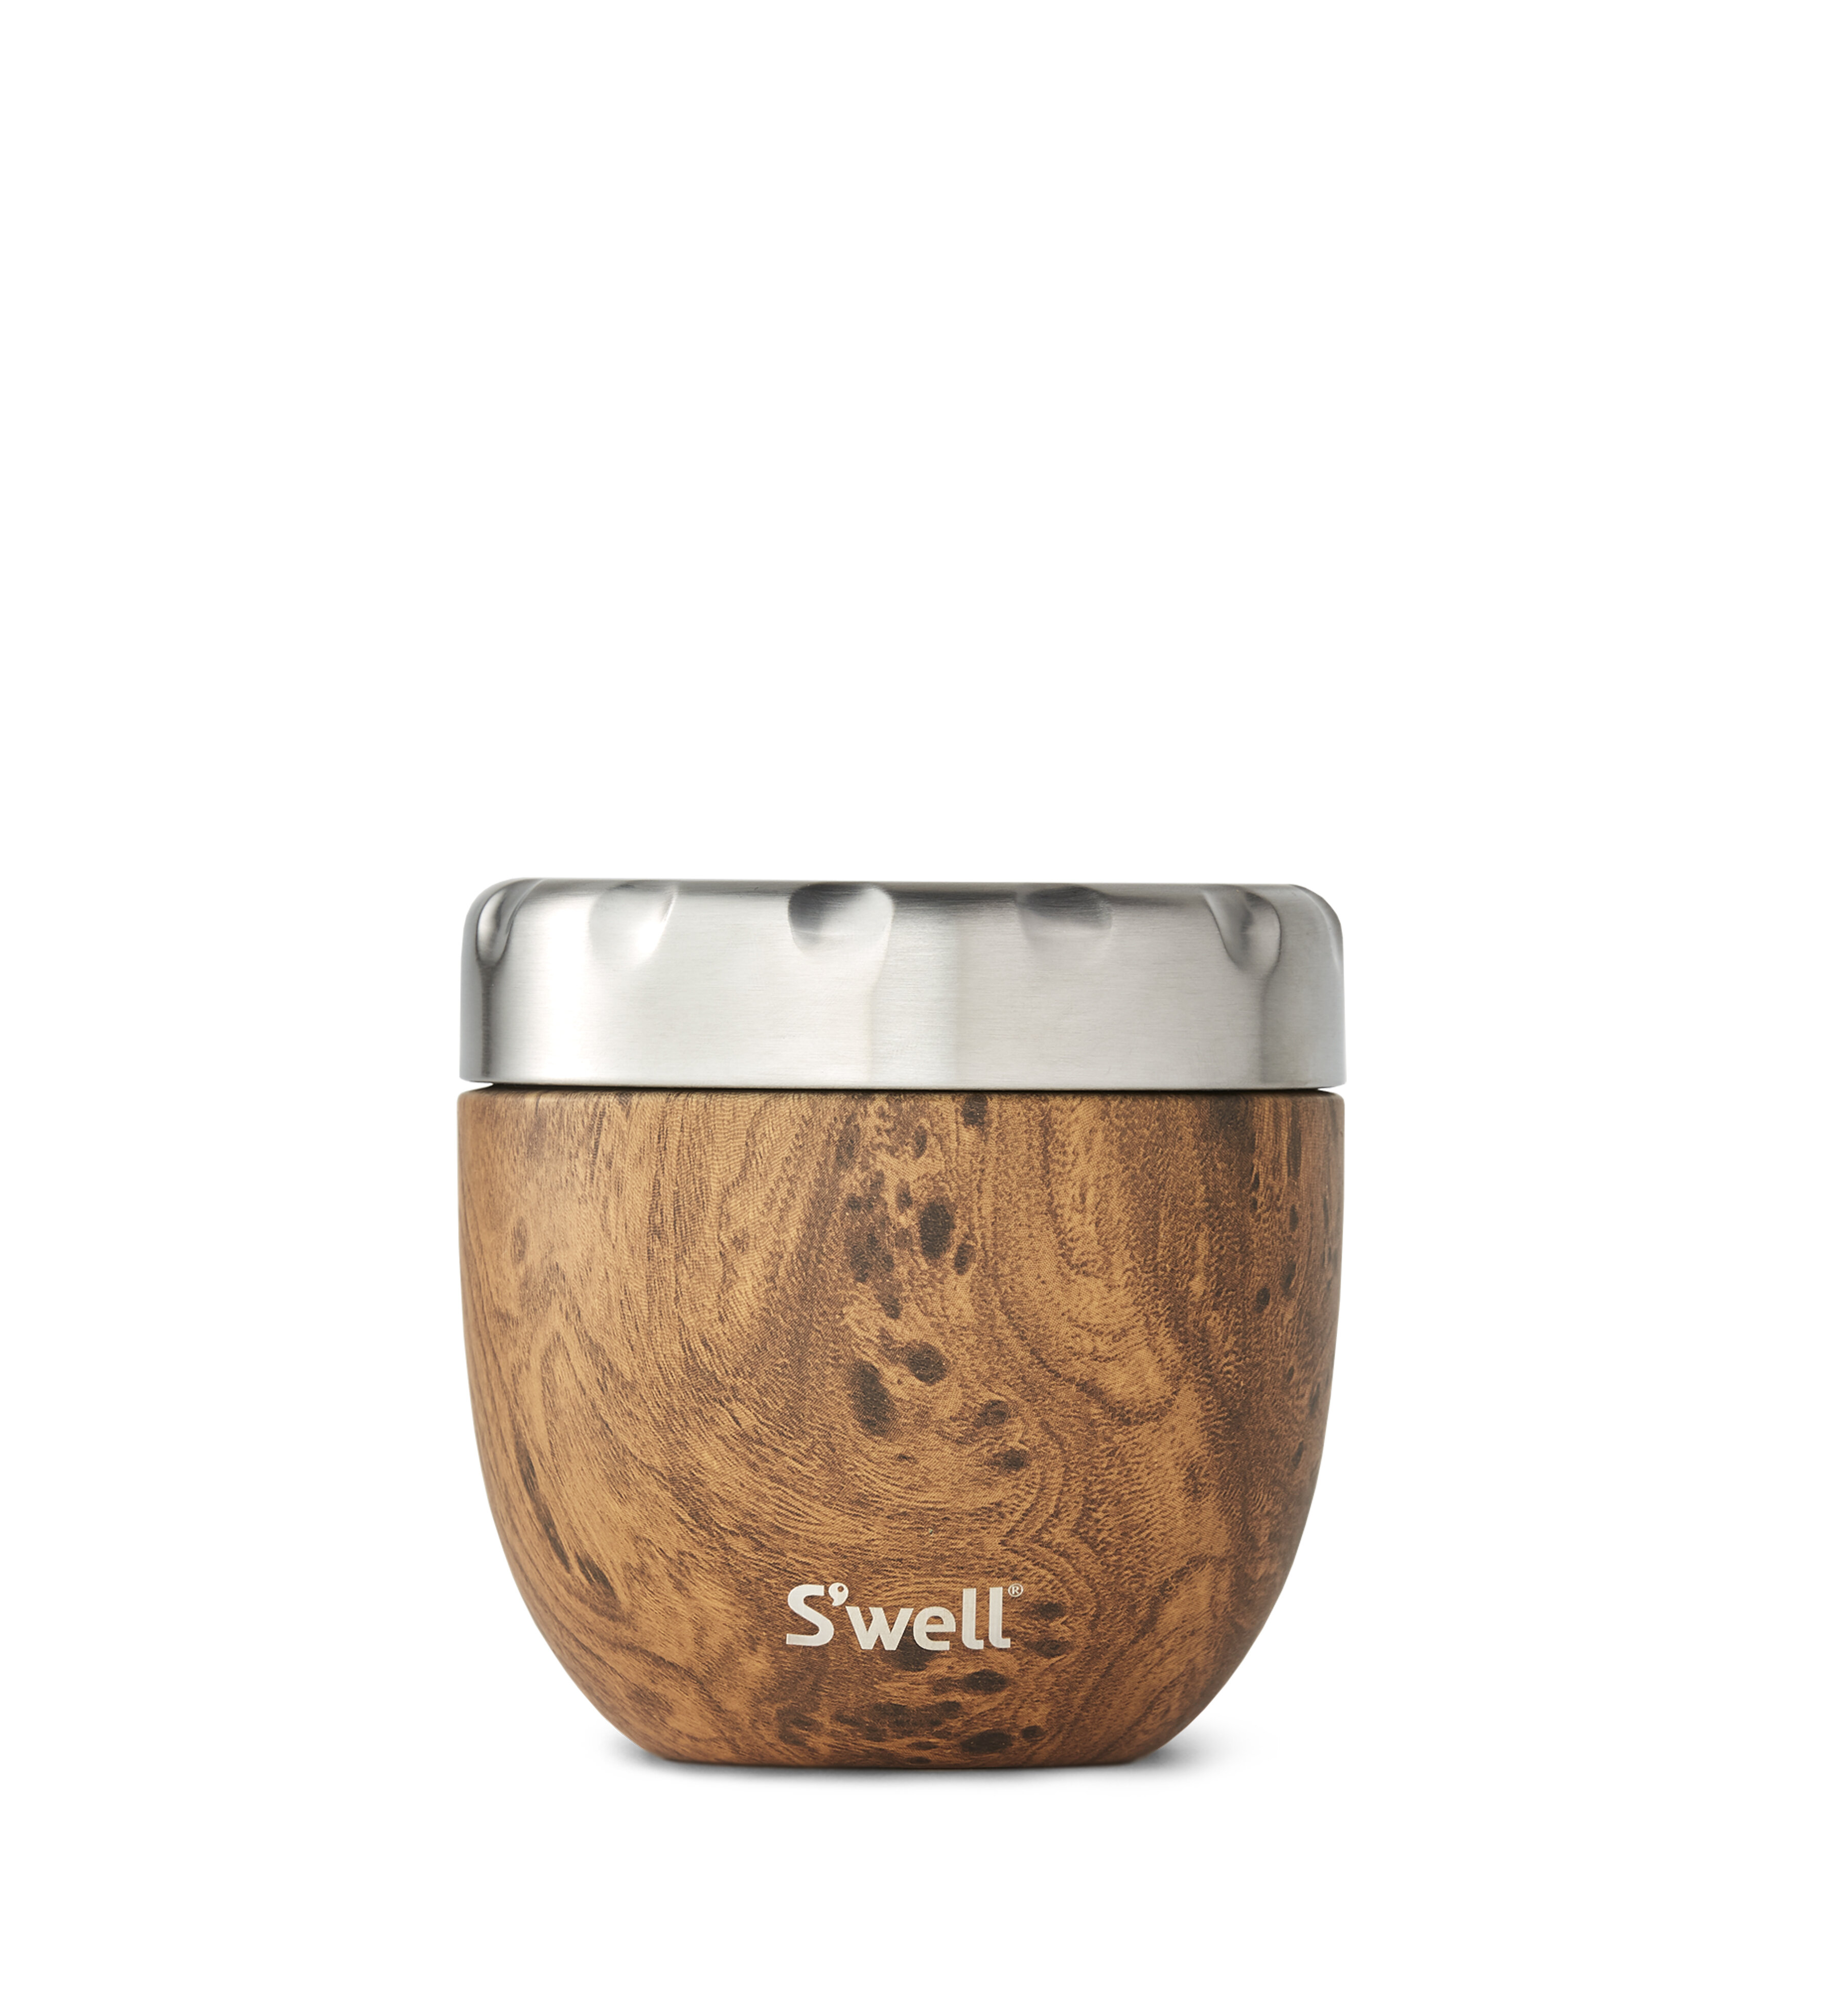 S'well Stainless Steel Bowls-21.5 Oz Triple-Layered Vacuum-Insulated  Containers Keeps Food and Drinks Cold for 11 Hours and Hot for 7-with No